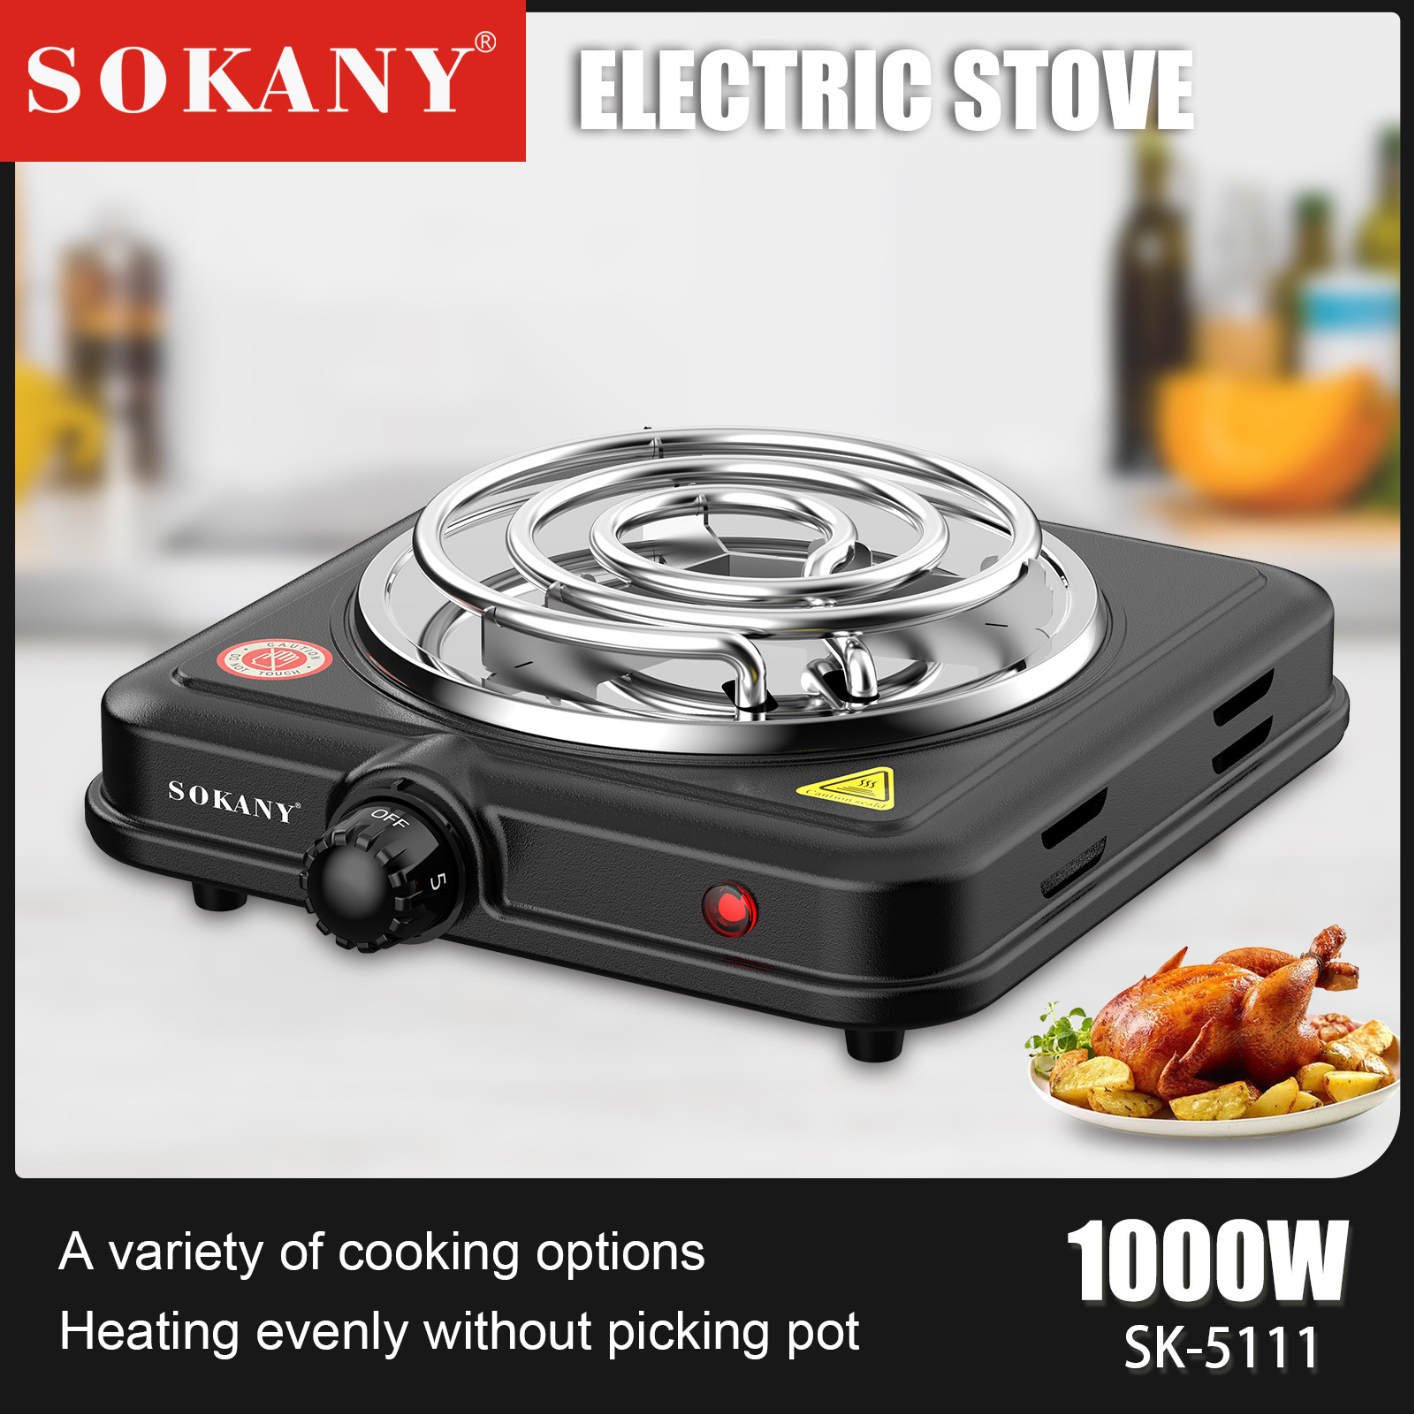 SOKANY 5111 220v 1000w Electric Stove Burner Kitchen Electric Stove Household Coffee Electric Stove Kitchen Coffee Heater Hotplate Cooking Appliances